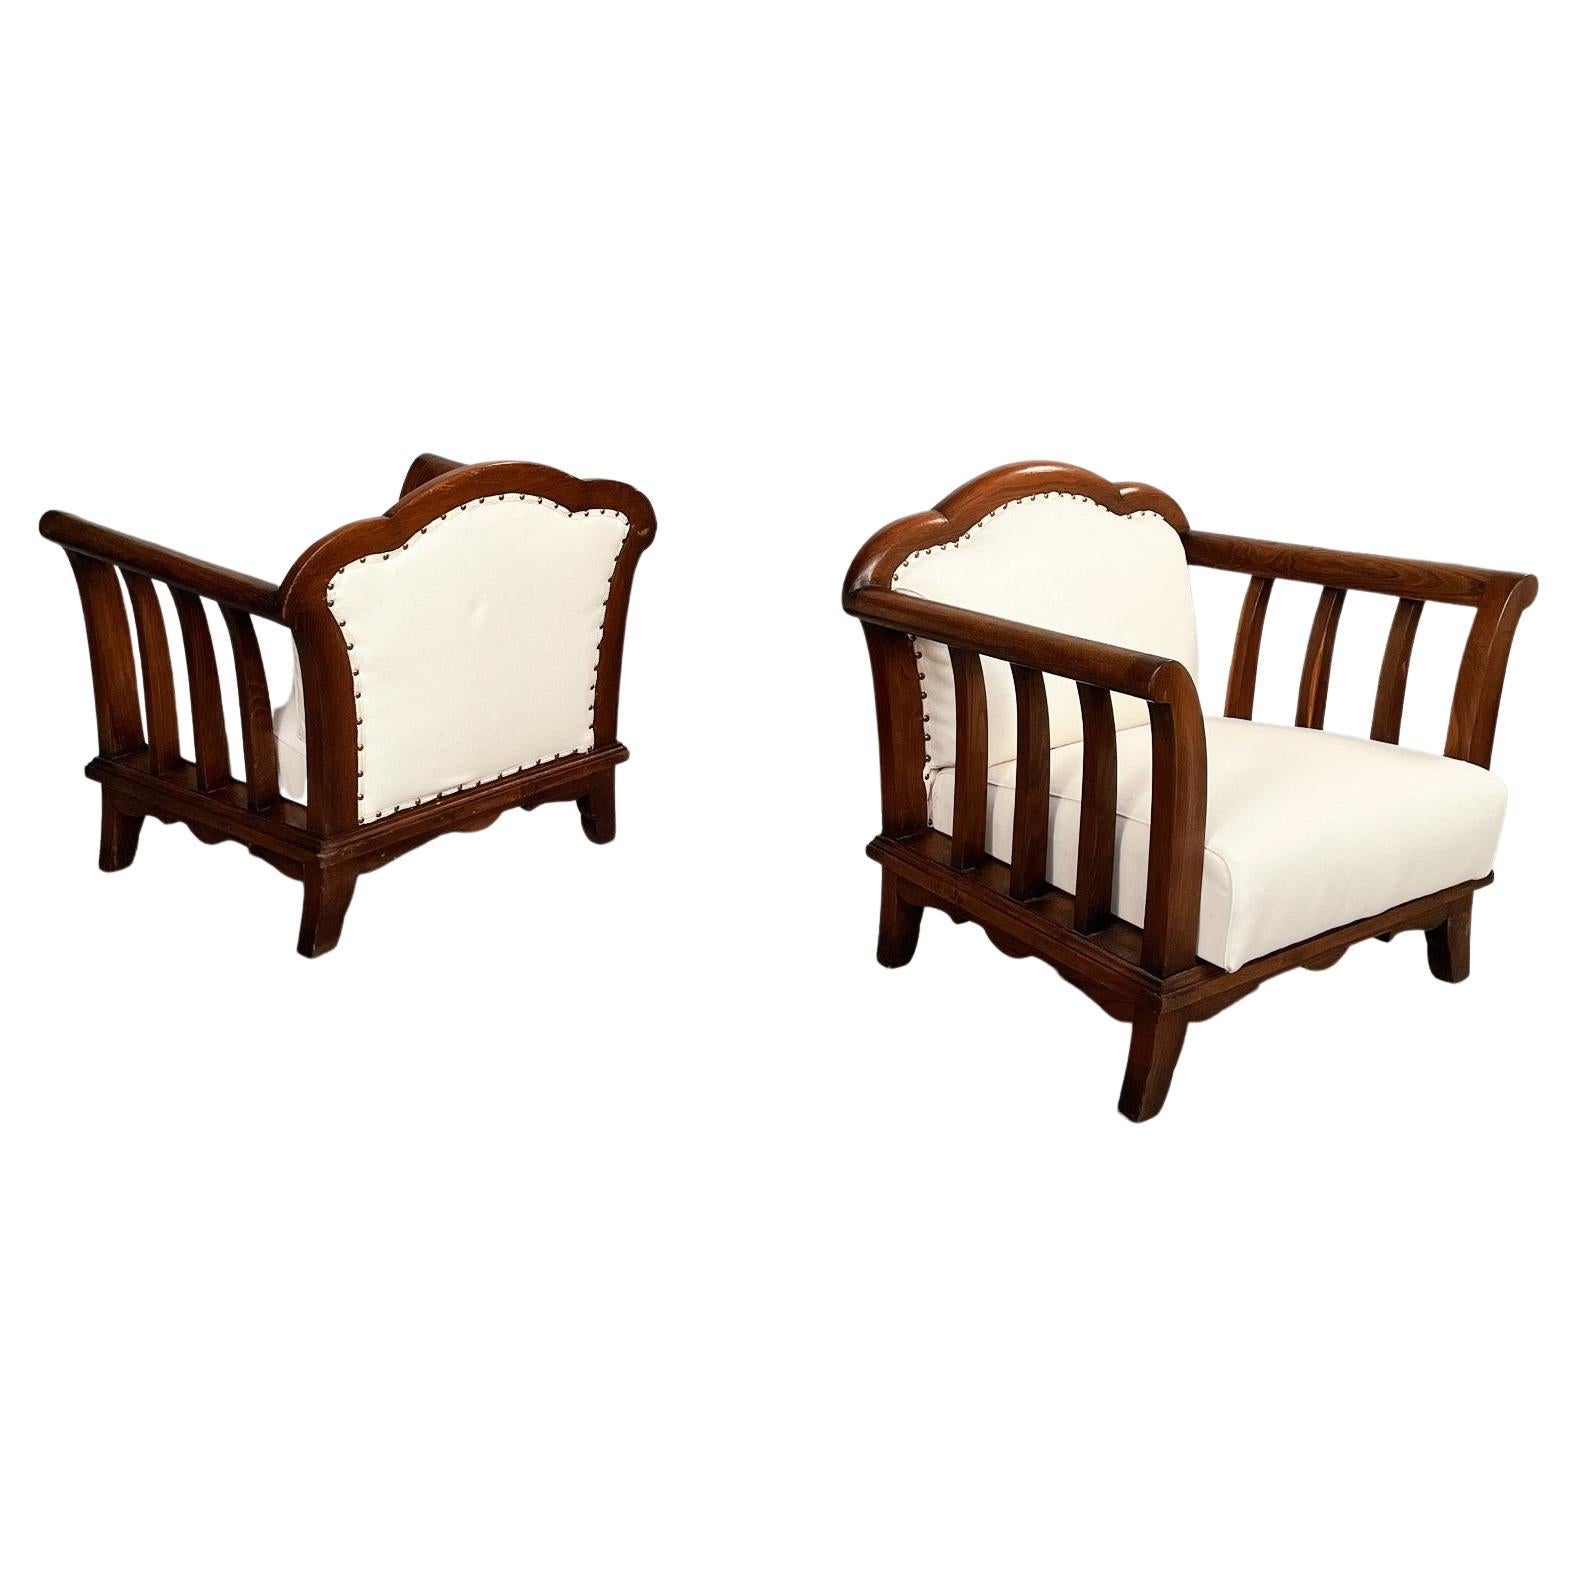 Italian Modern Wooden Armchairs with White Fabric, 1940s For Sale